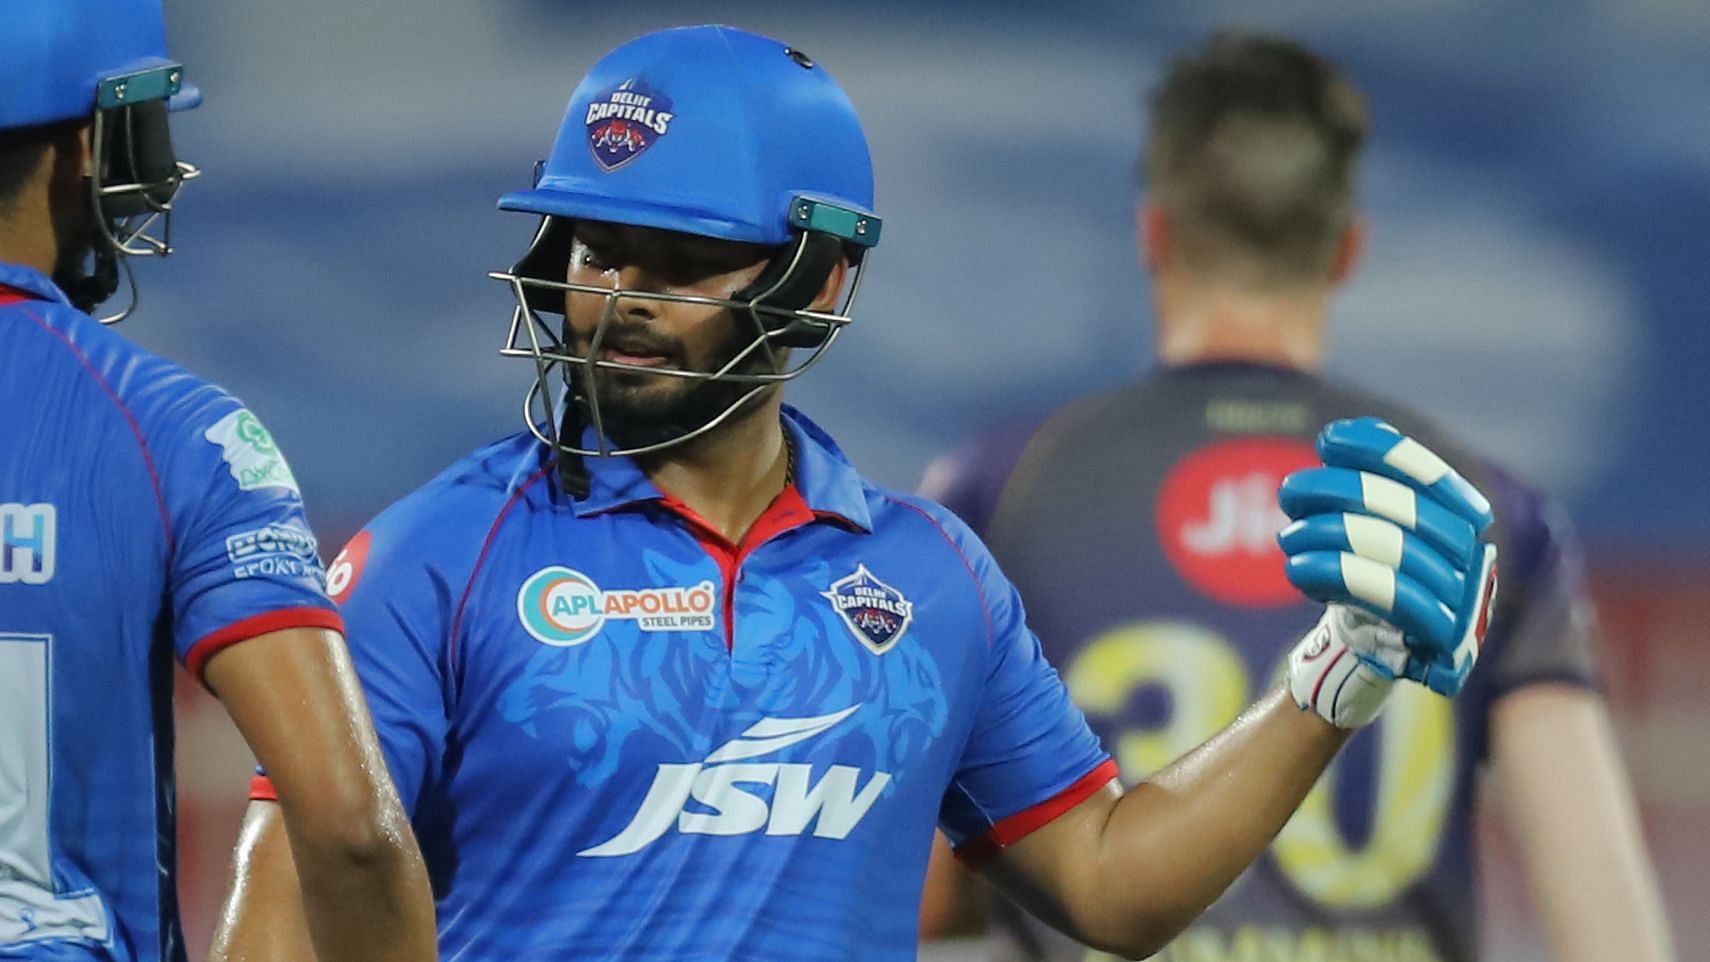 Rishabh Pant has vastly improved his batting and he is a major asset for the Delhi Capitals, says Brian Lara.